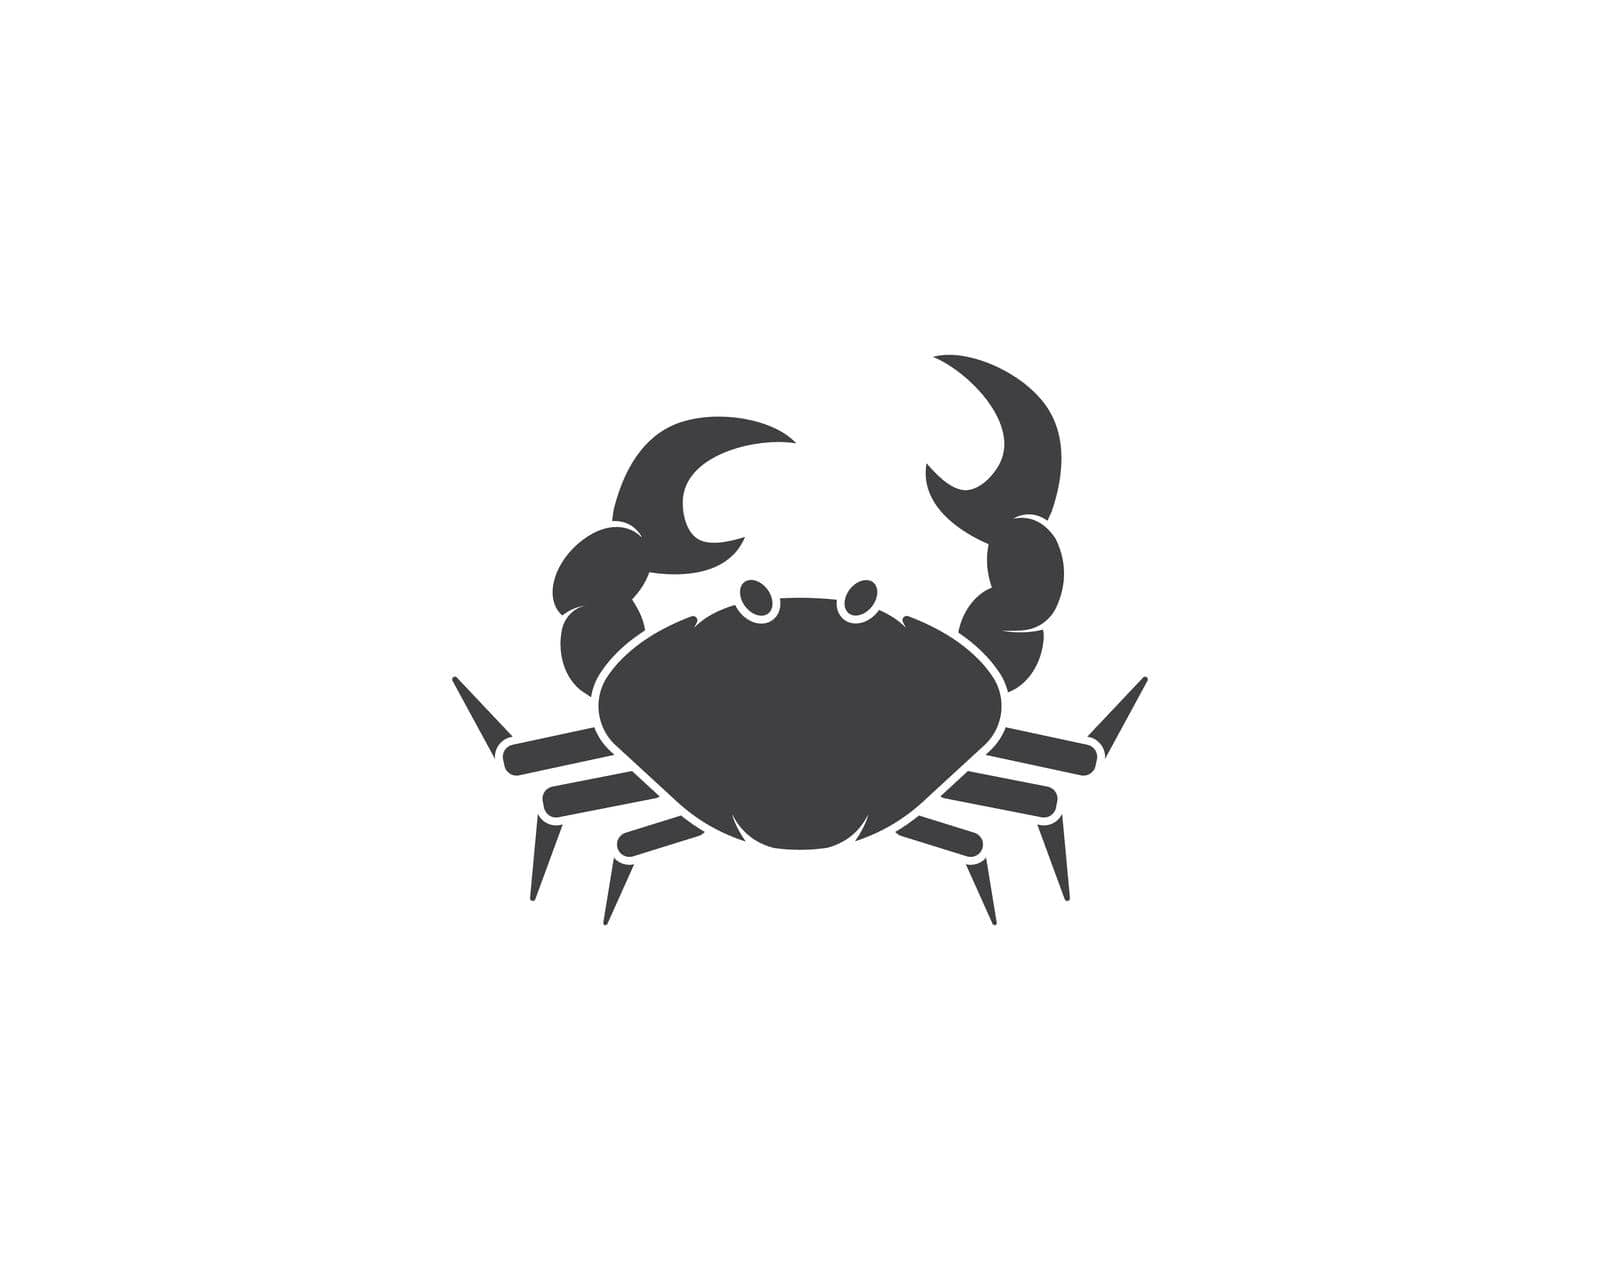 crabs icon,illustration for bussines  by idan